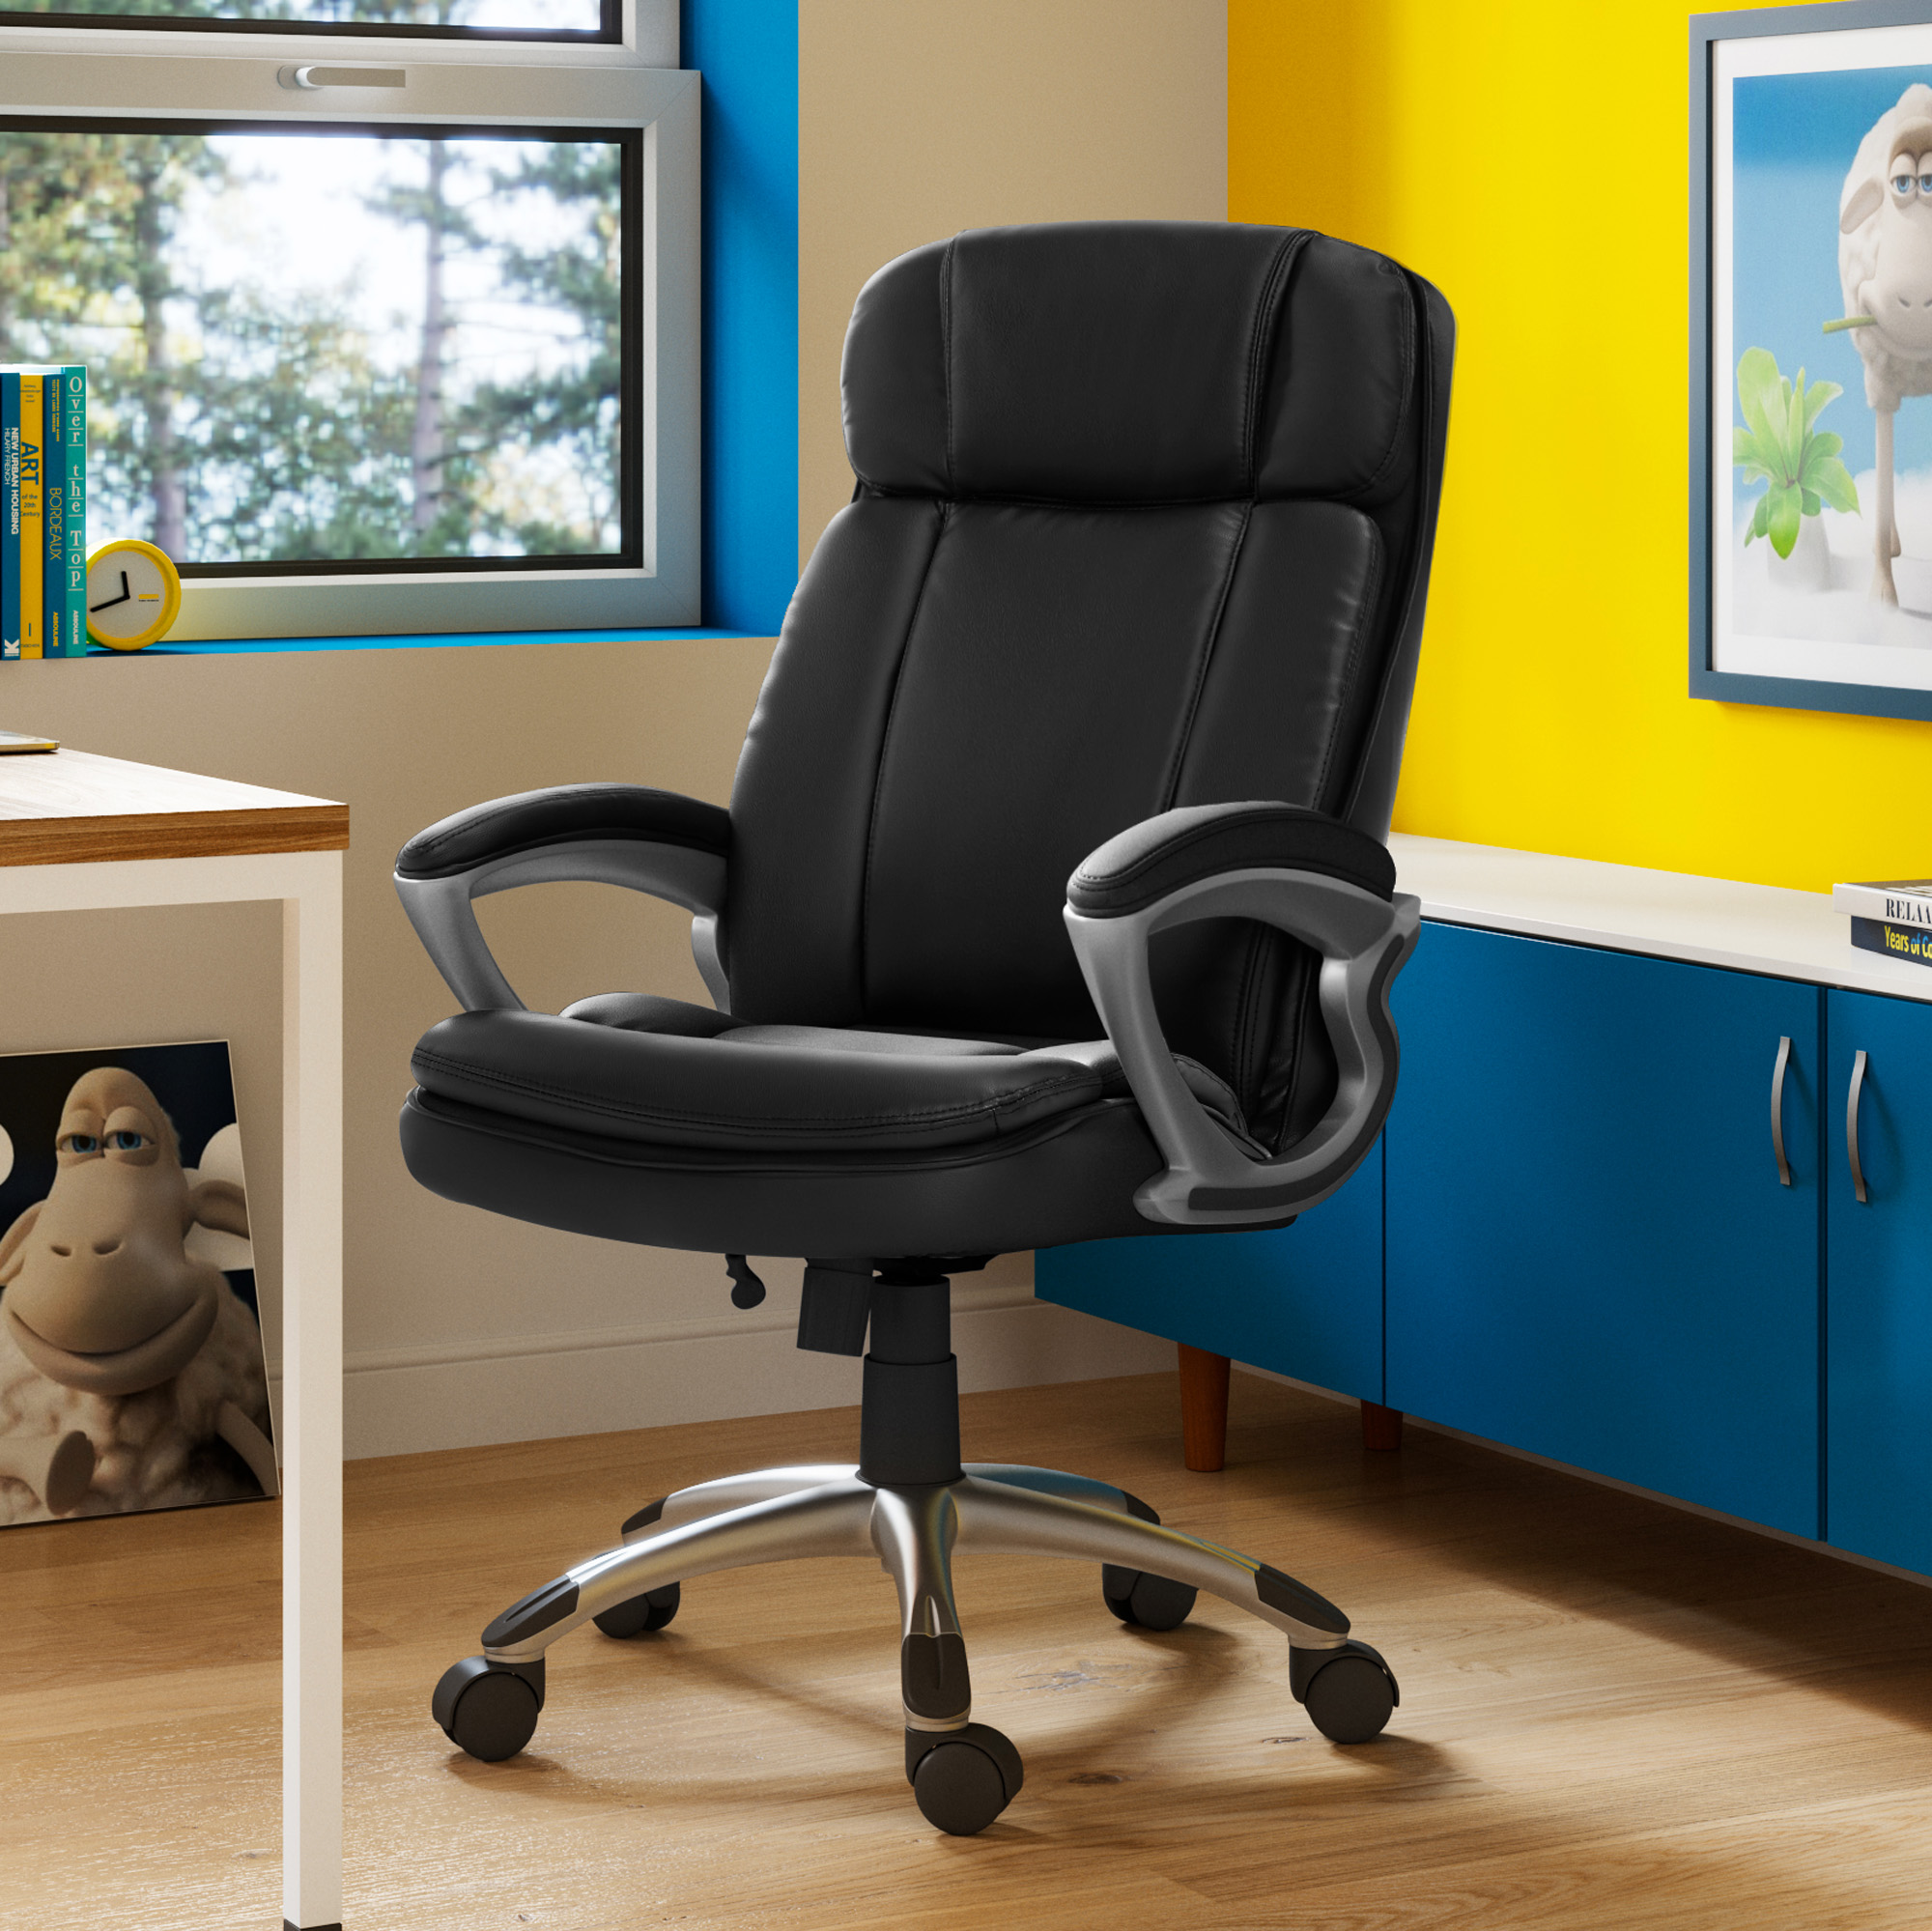 Serta Puresoft Faux Leather Big and Tall Executive Office Chair, Black - image 2 of 22